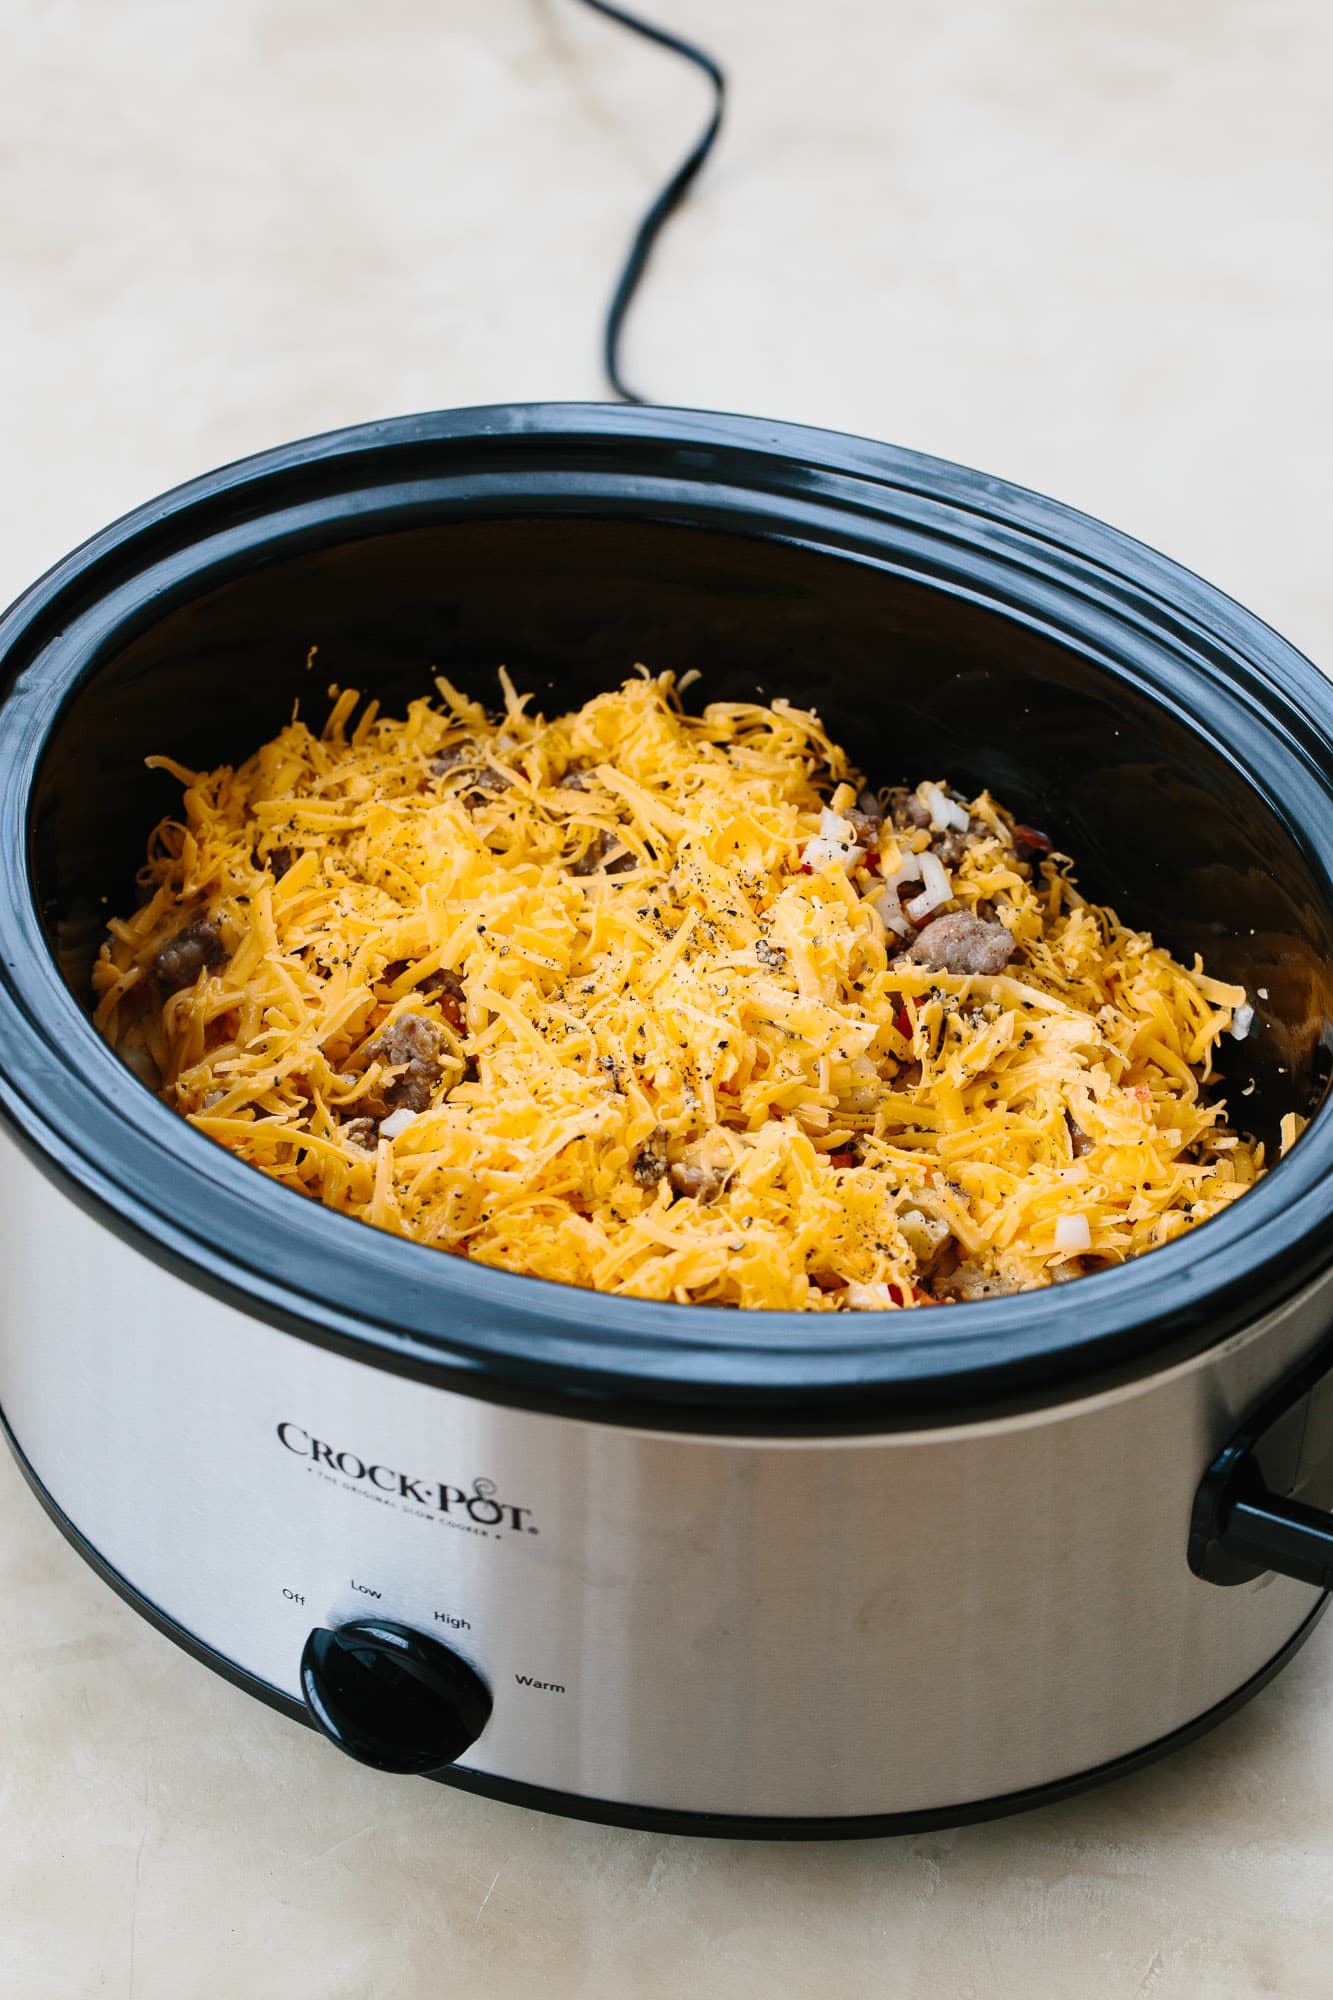 Slow Cooker Sausage and Egg Casserole – Kalyn's Kitchen